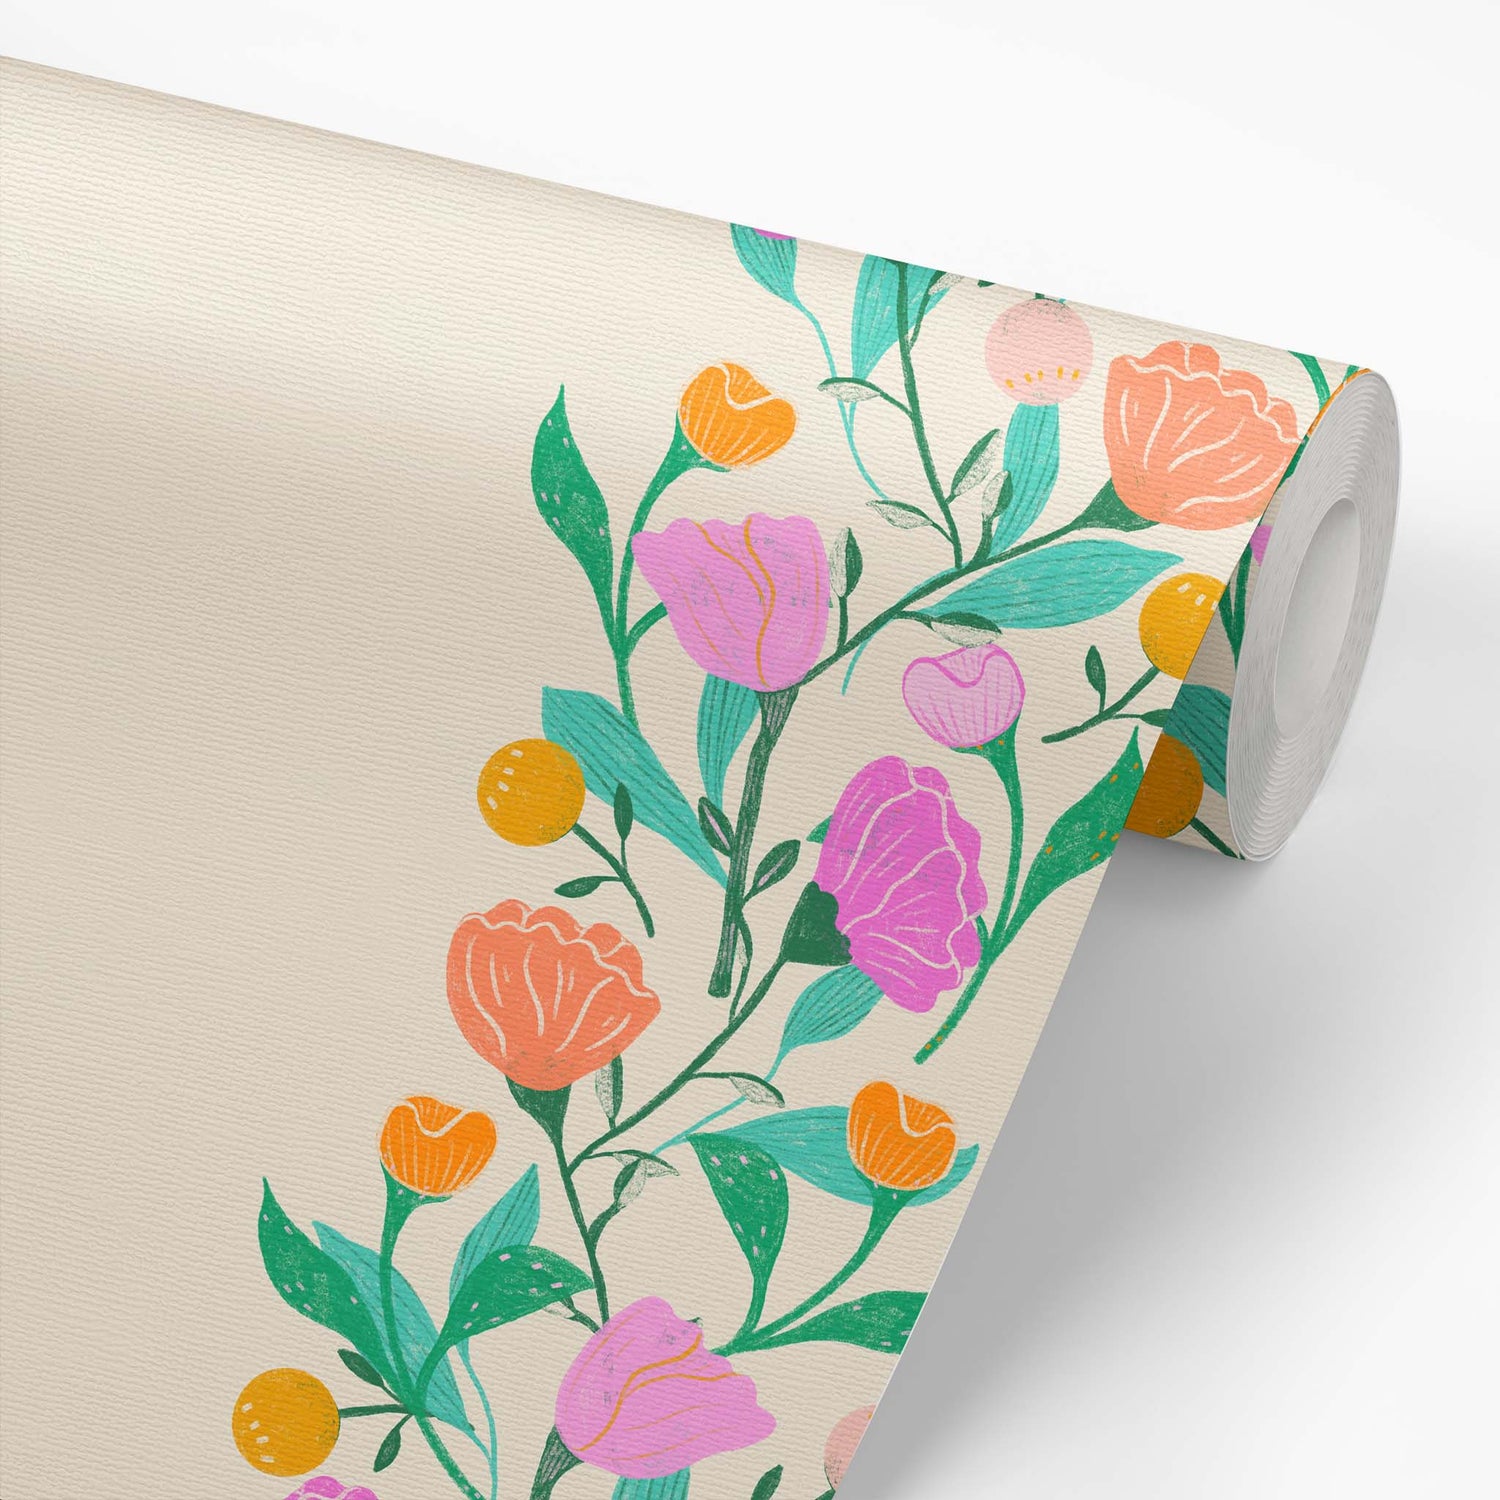 Wallpaper roll preview of this Floral Stripe Wallpaper in Bright by artist Brenda Bird for Ayara.